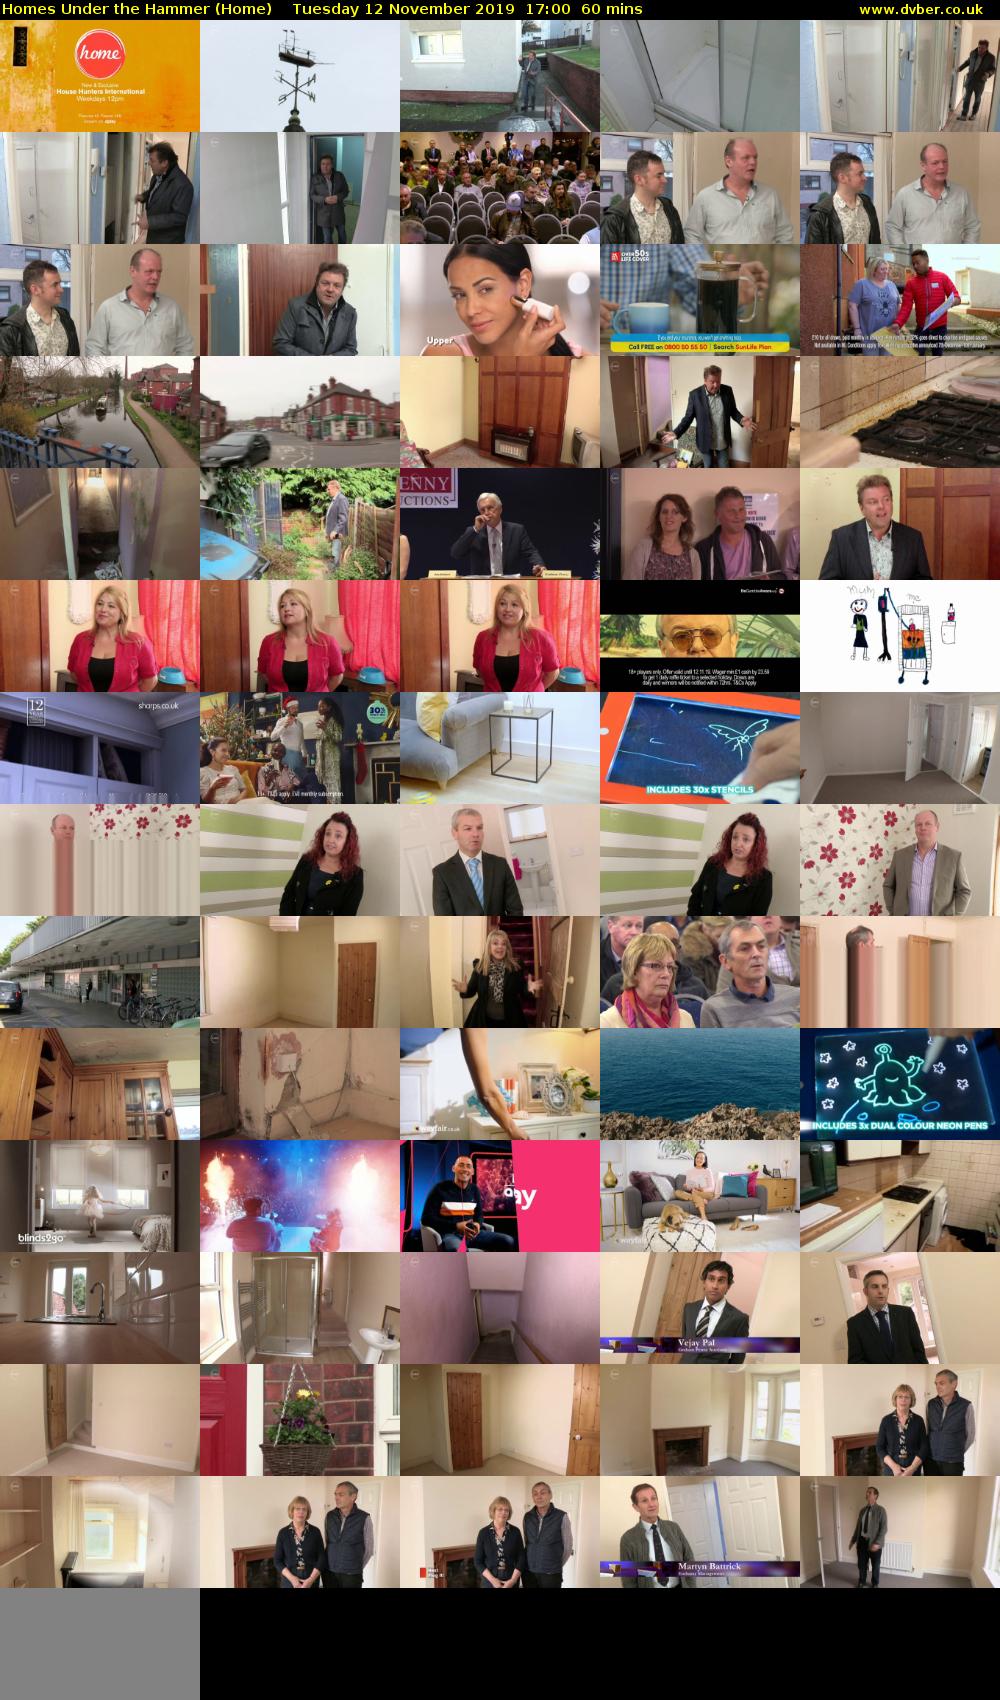 Homes Under the Hammer (Home) Tuesday 12 November 2019 17:00 - 18:00